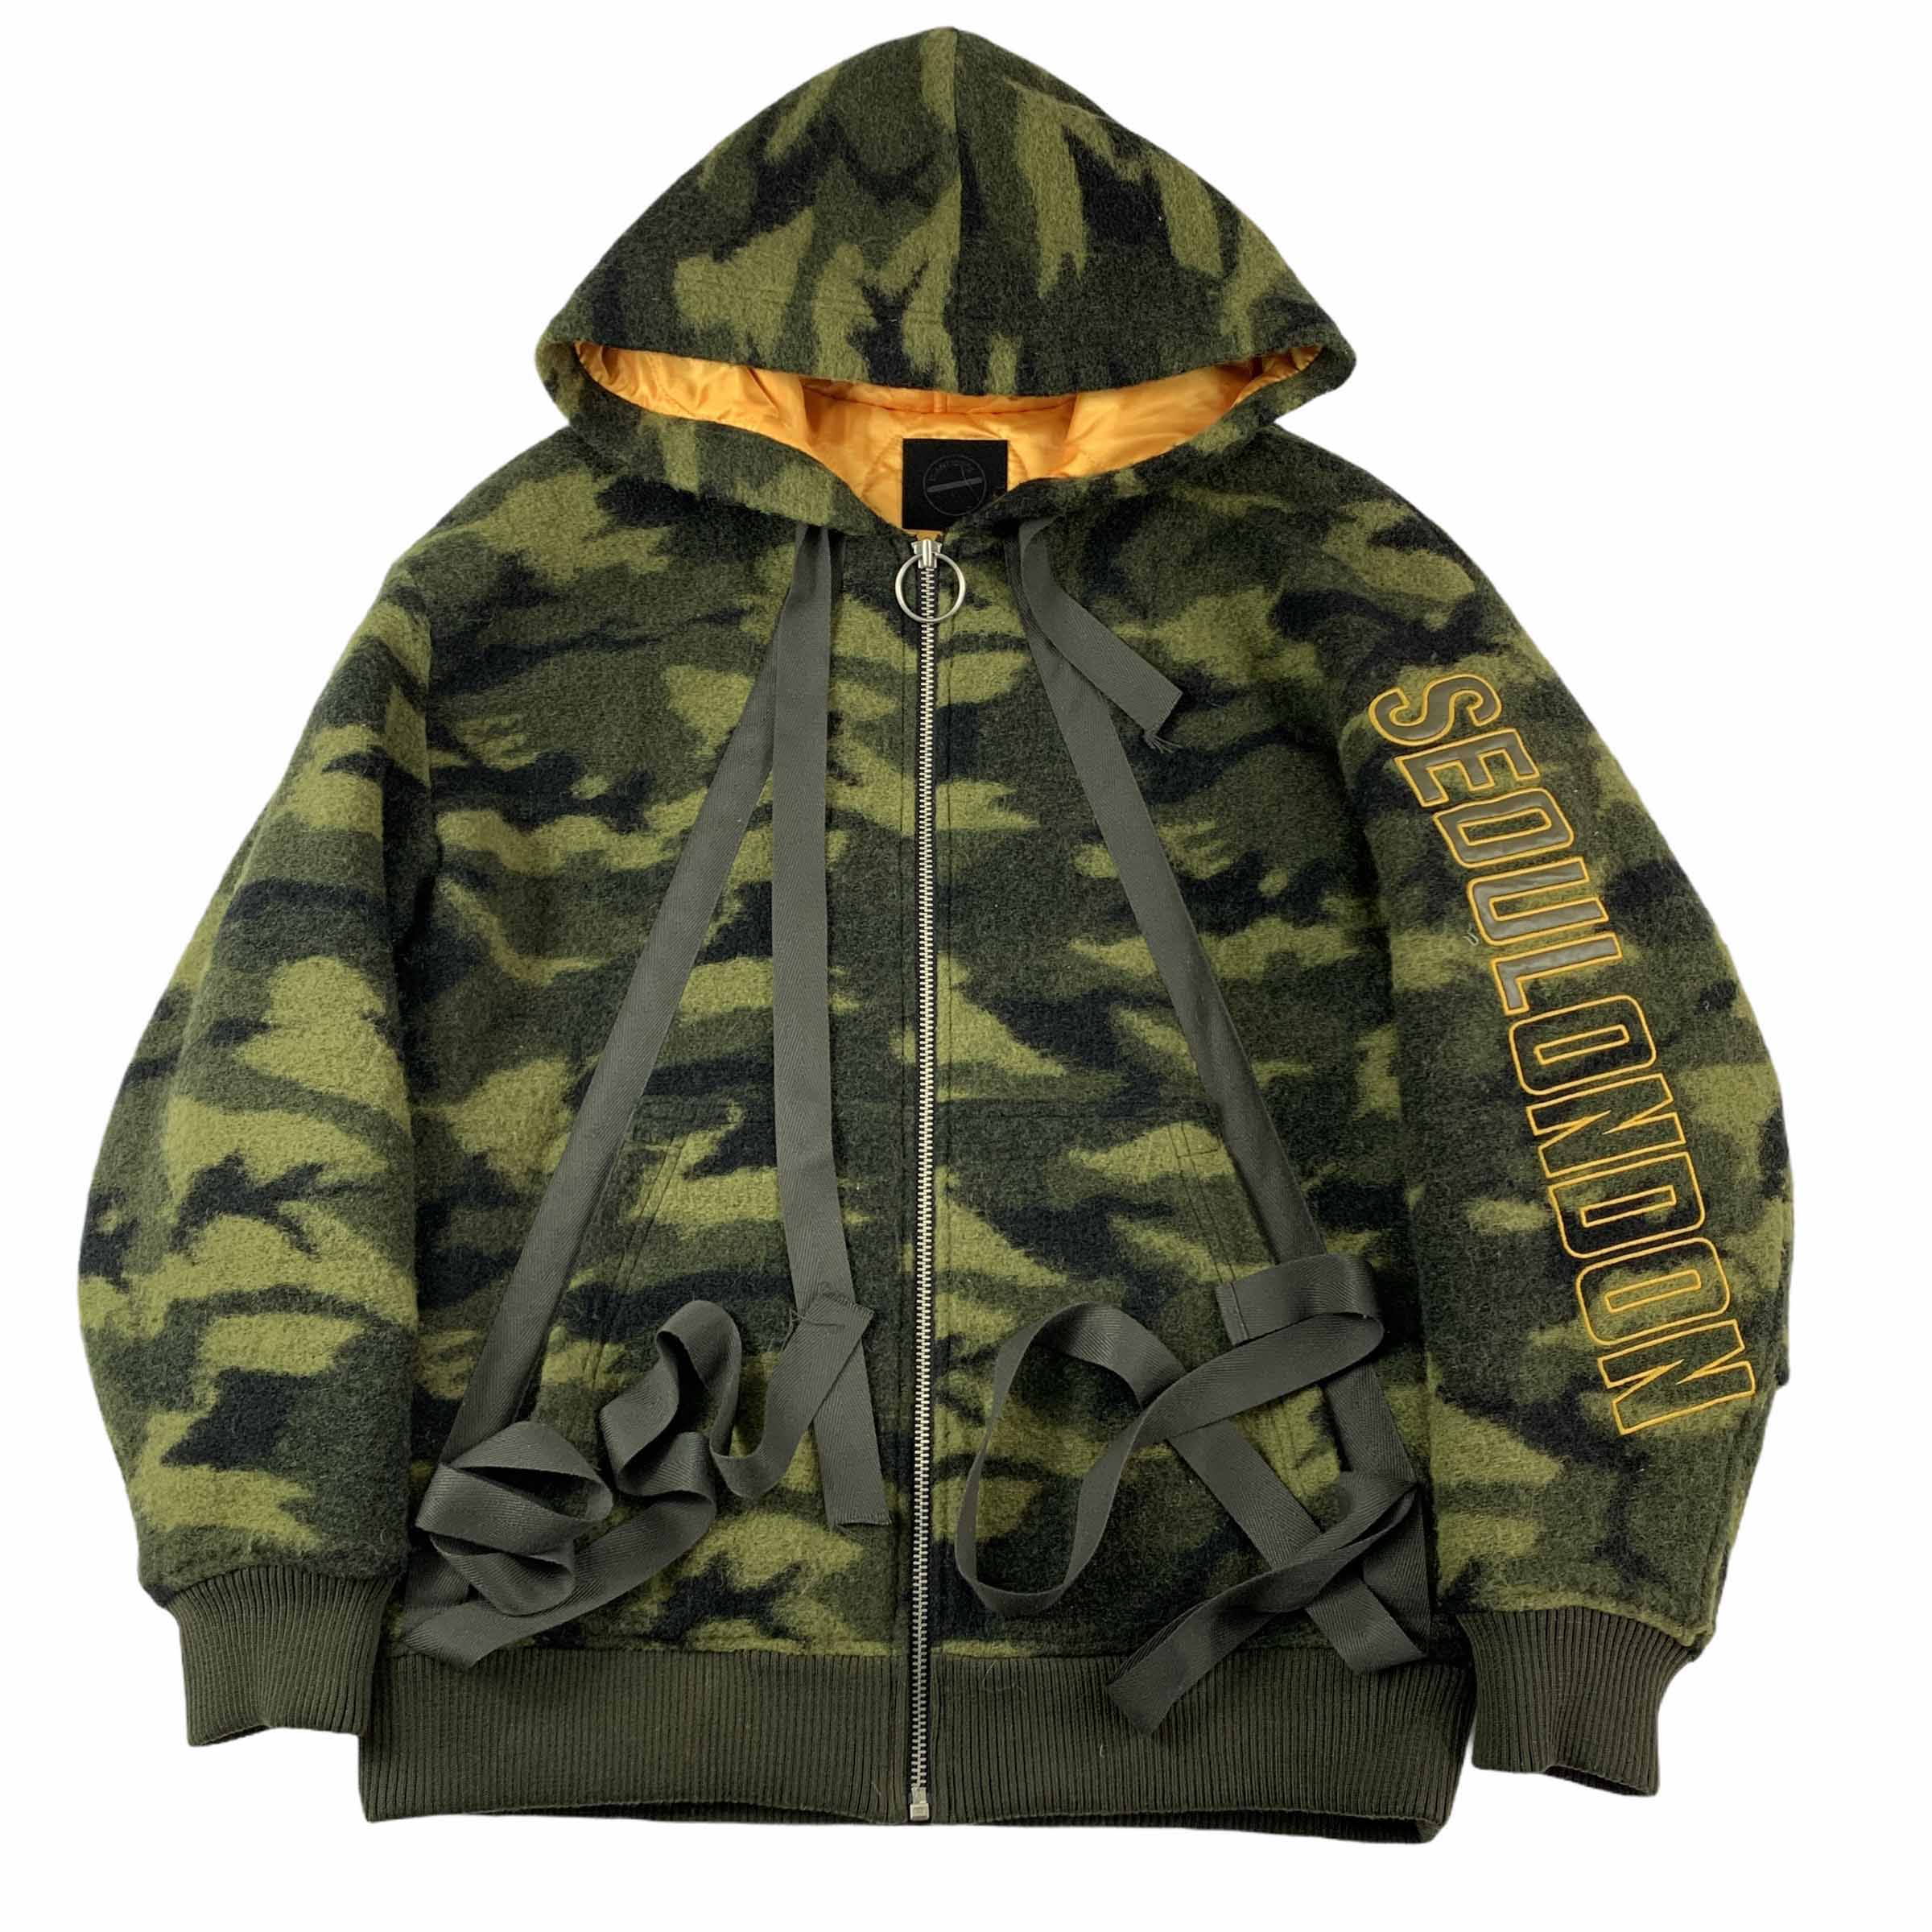 [D-Antidote] Camo hooded jacket - Size M